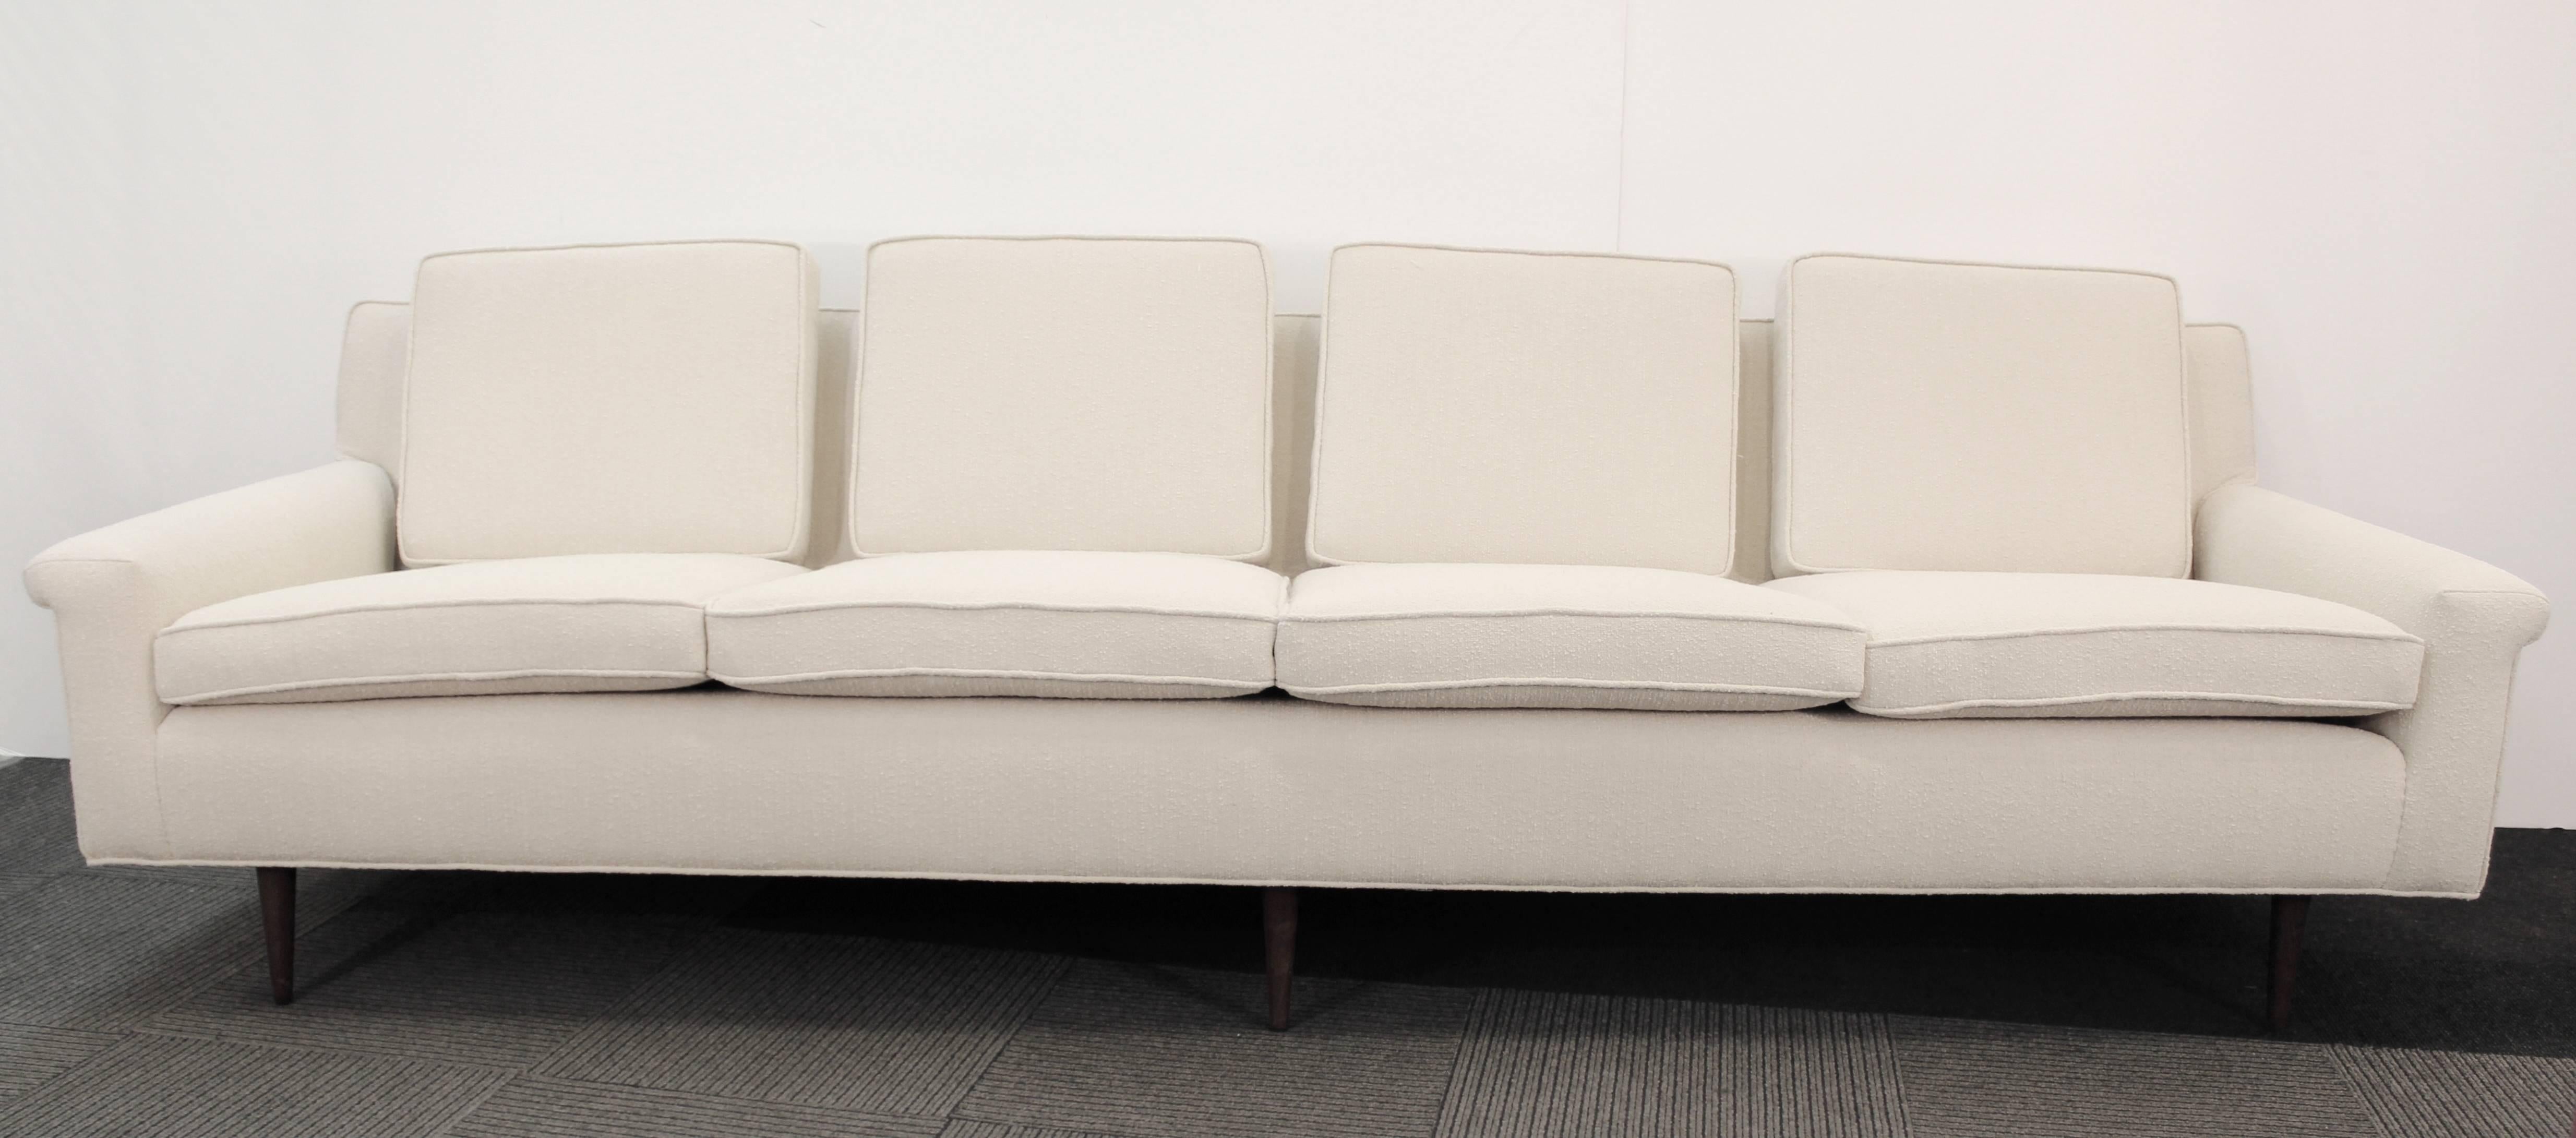 Thayer Coggin four-seat sofa manufactured circa 1960s and upholstered in off-white bouclé fabric and raised on tapered walnut legs. Markings include original label. Excellent vintage condition, newly reupholstered.

 